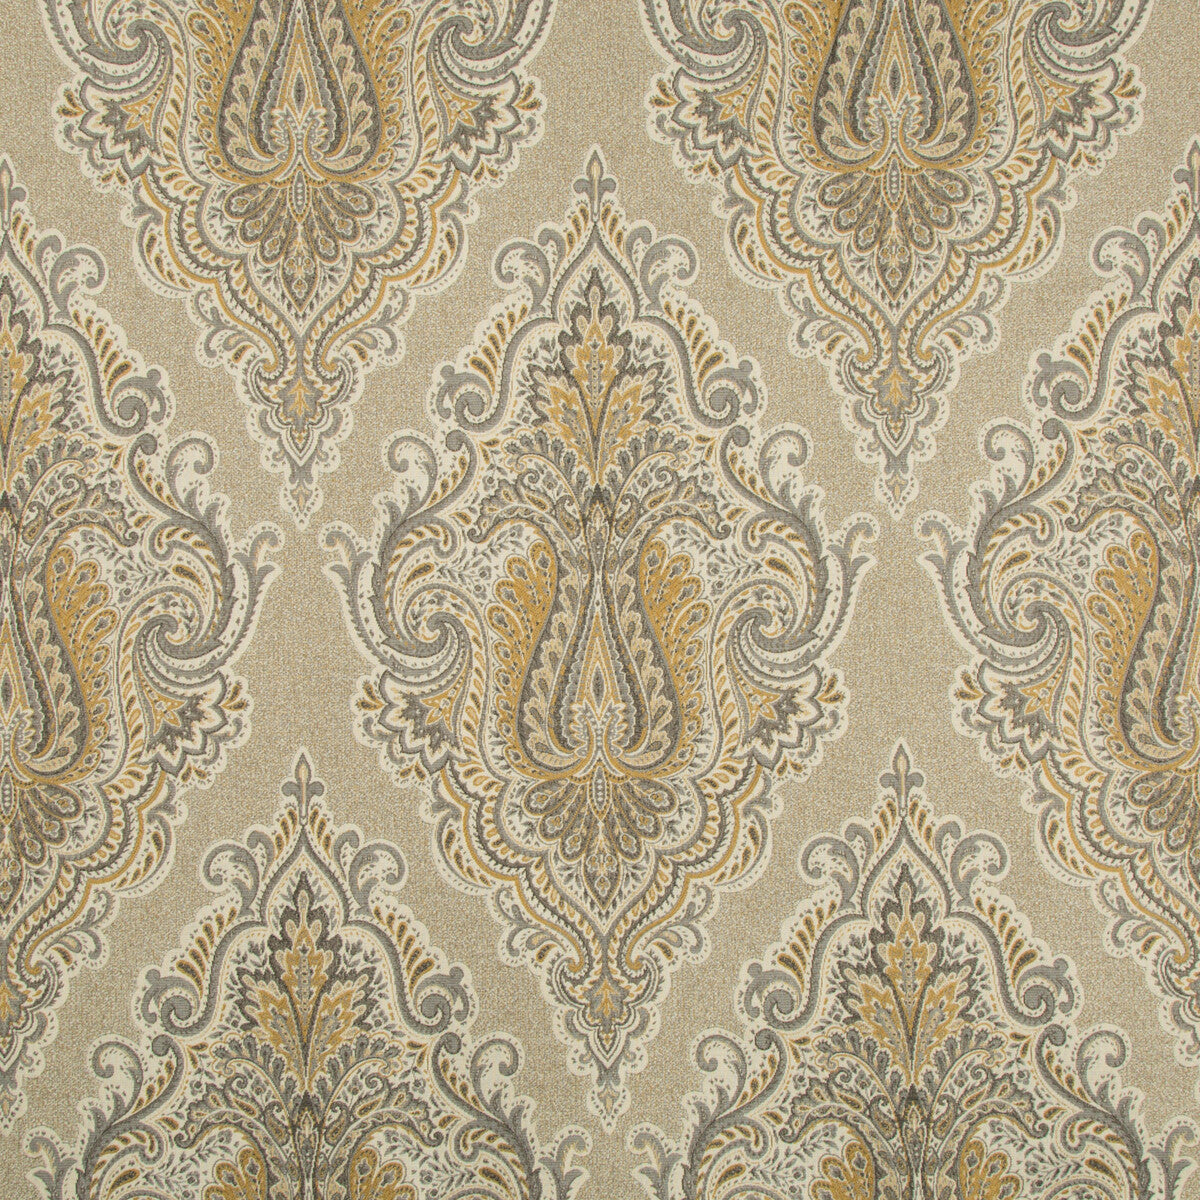 Kravet Contract fabric in 34770-421 color - pattern 34770.421.0 - by Kravet Contract in the Crypton Incase collection